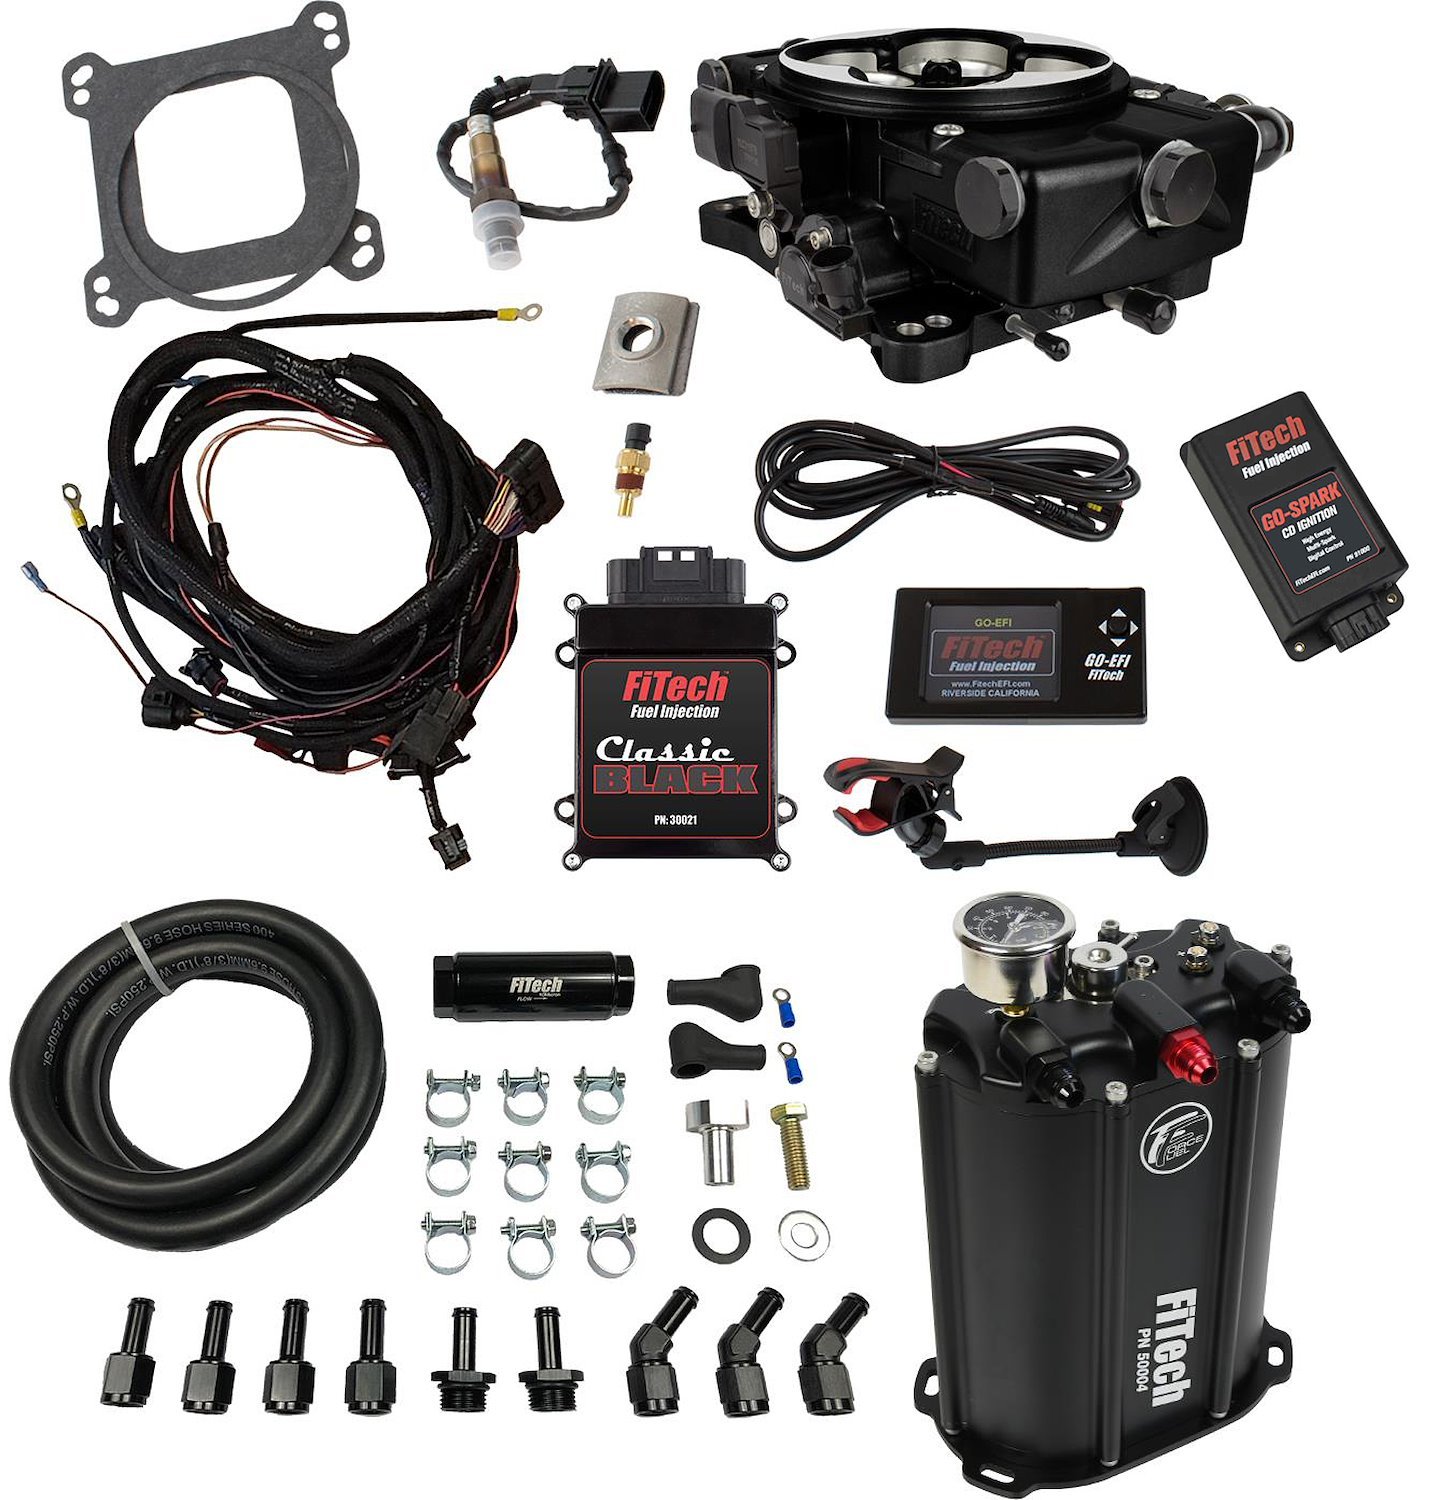 Go EFI Classic 650 HP Throttle Body Fuel Injection Master Kit [with Force Fuel System & CDI Box] Black